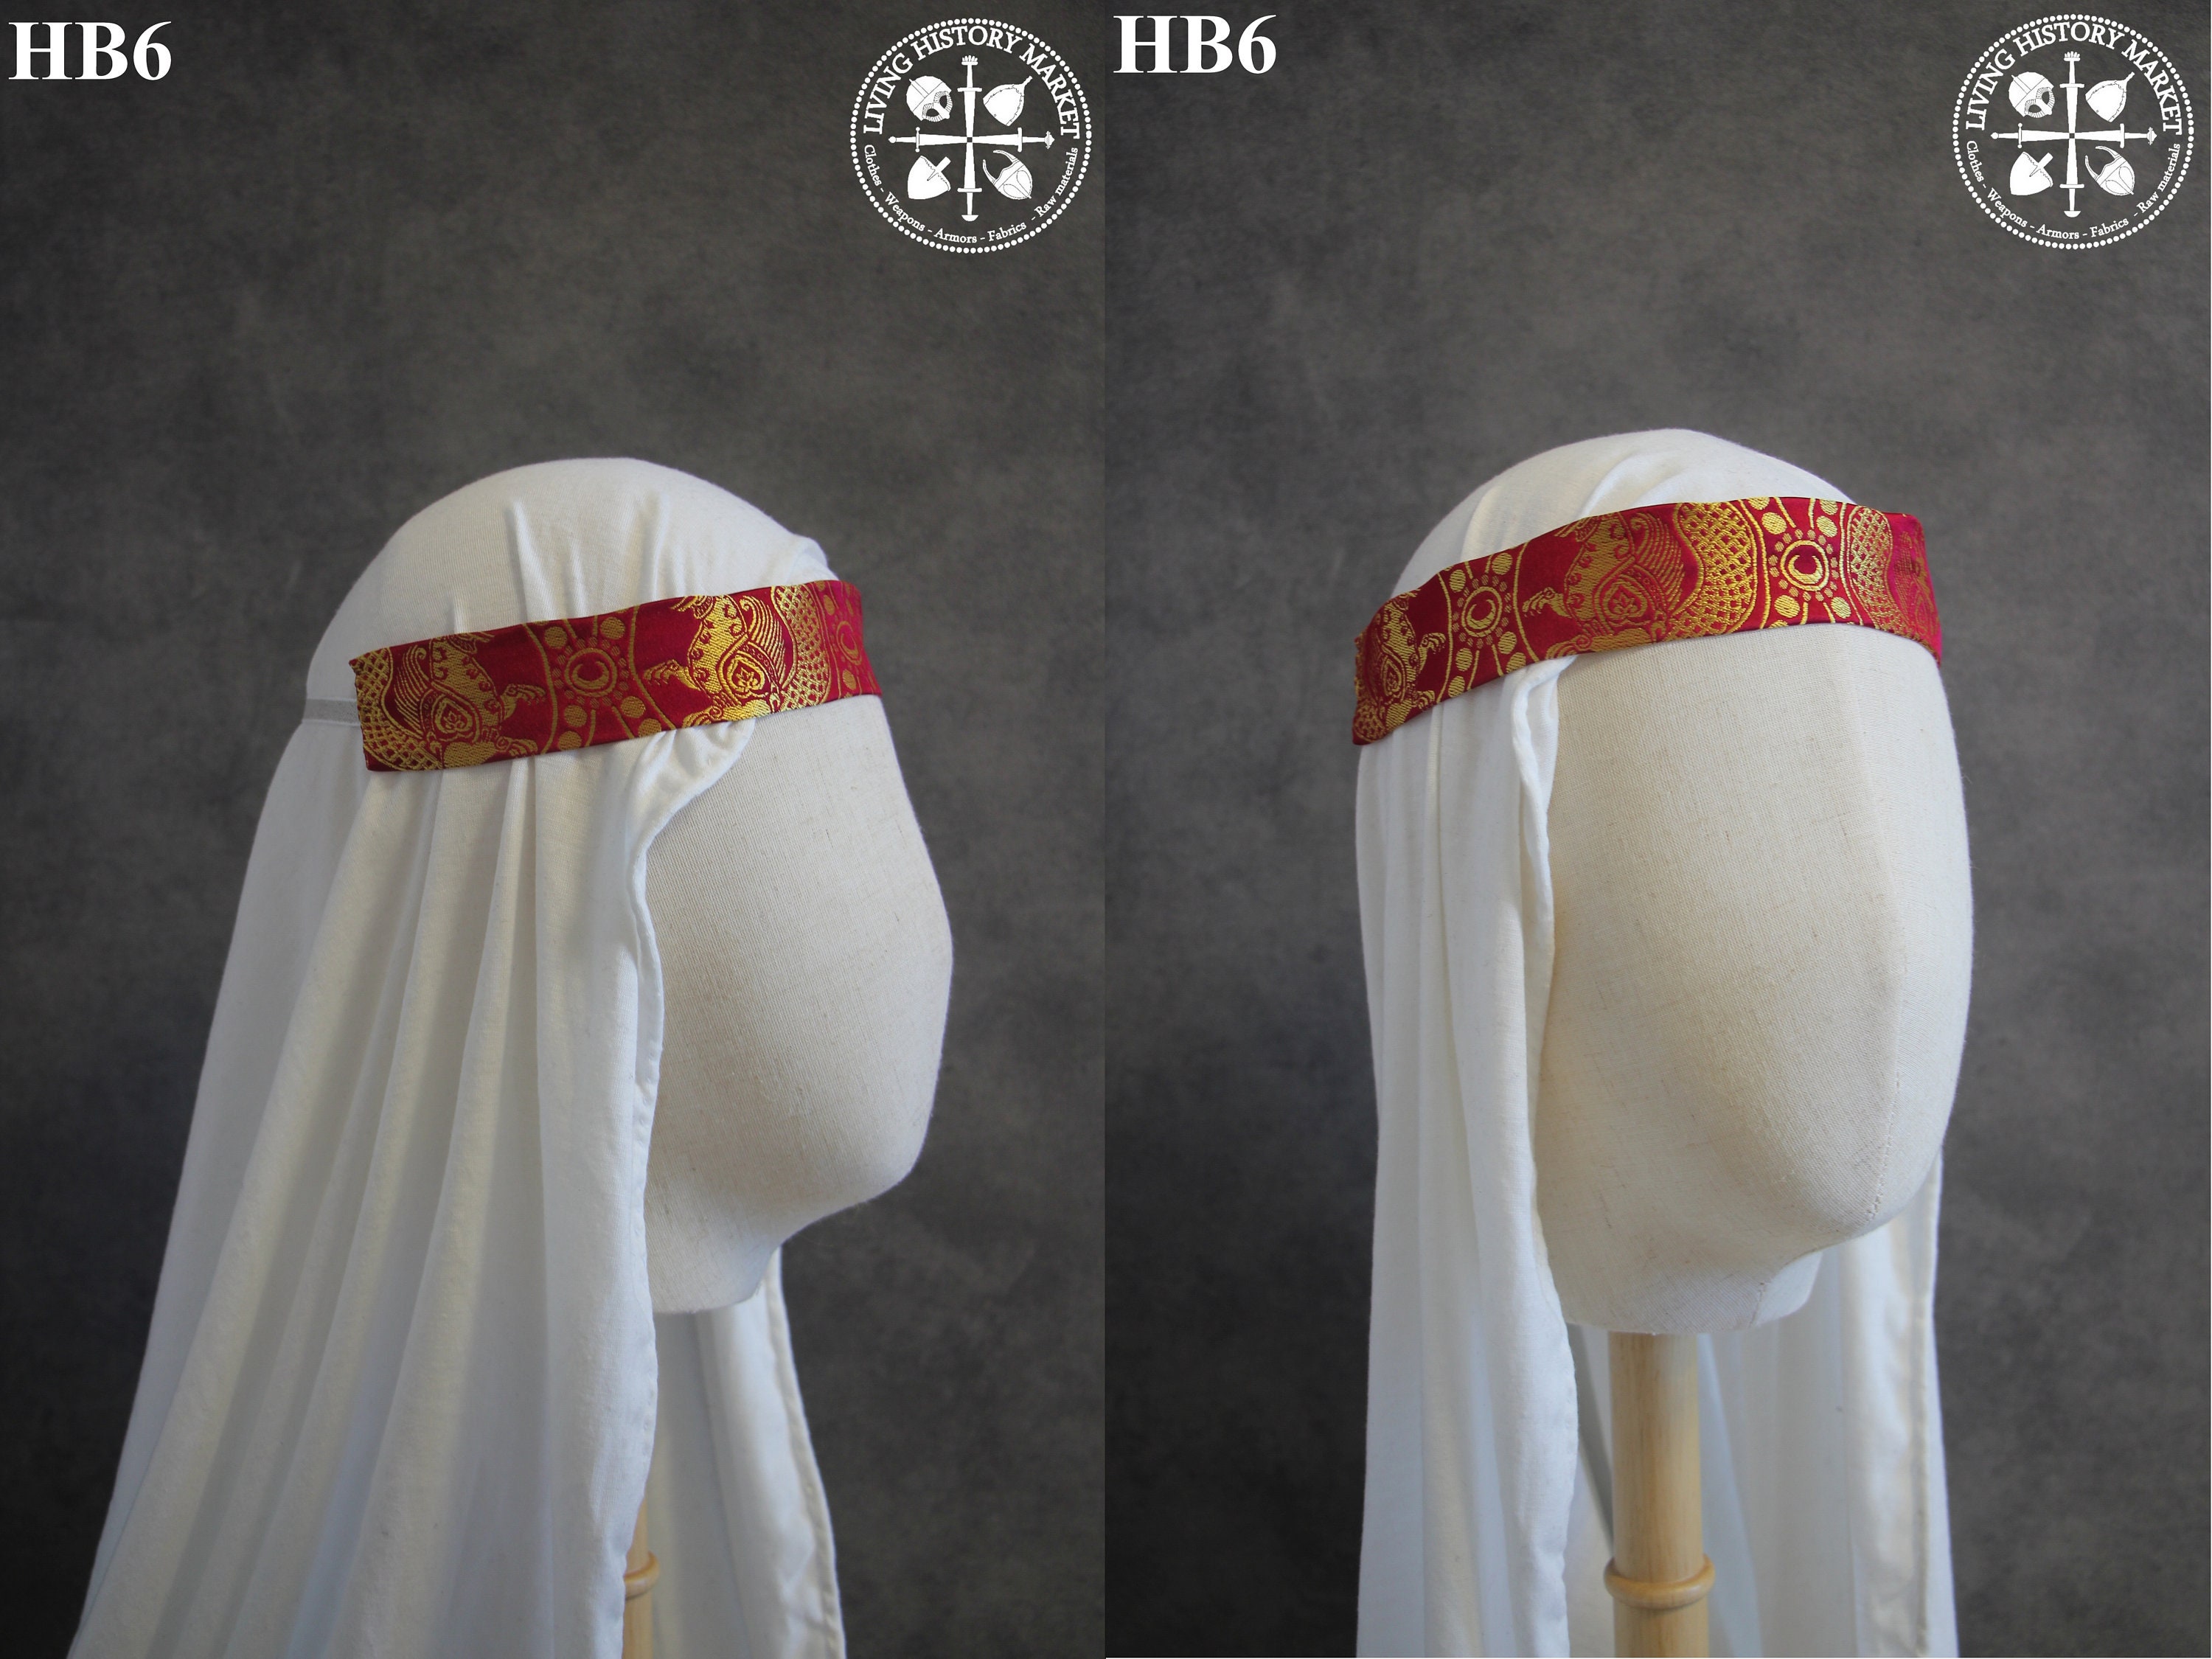 Silk veil “Water Flowers” medieval head and hair covering for sale.  Available in: white natural silk :: by medieval store ArmStreet